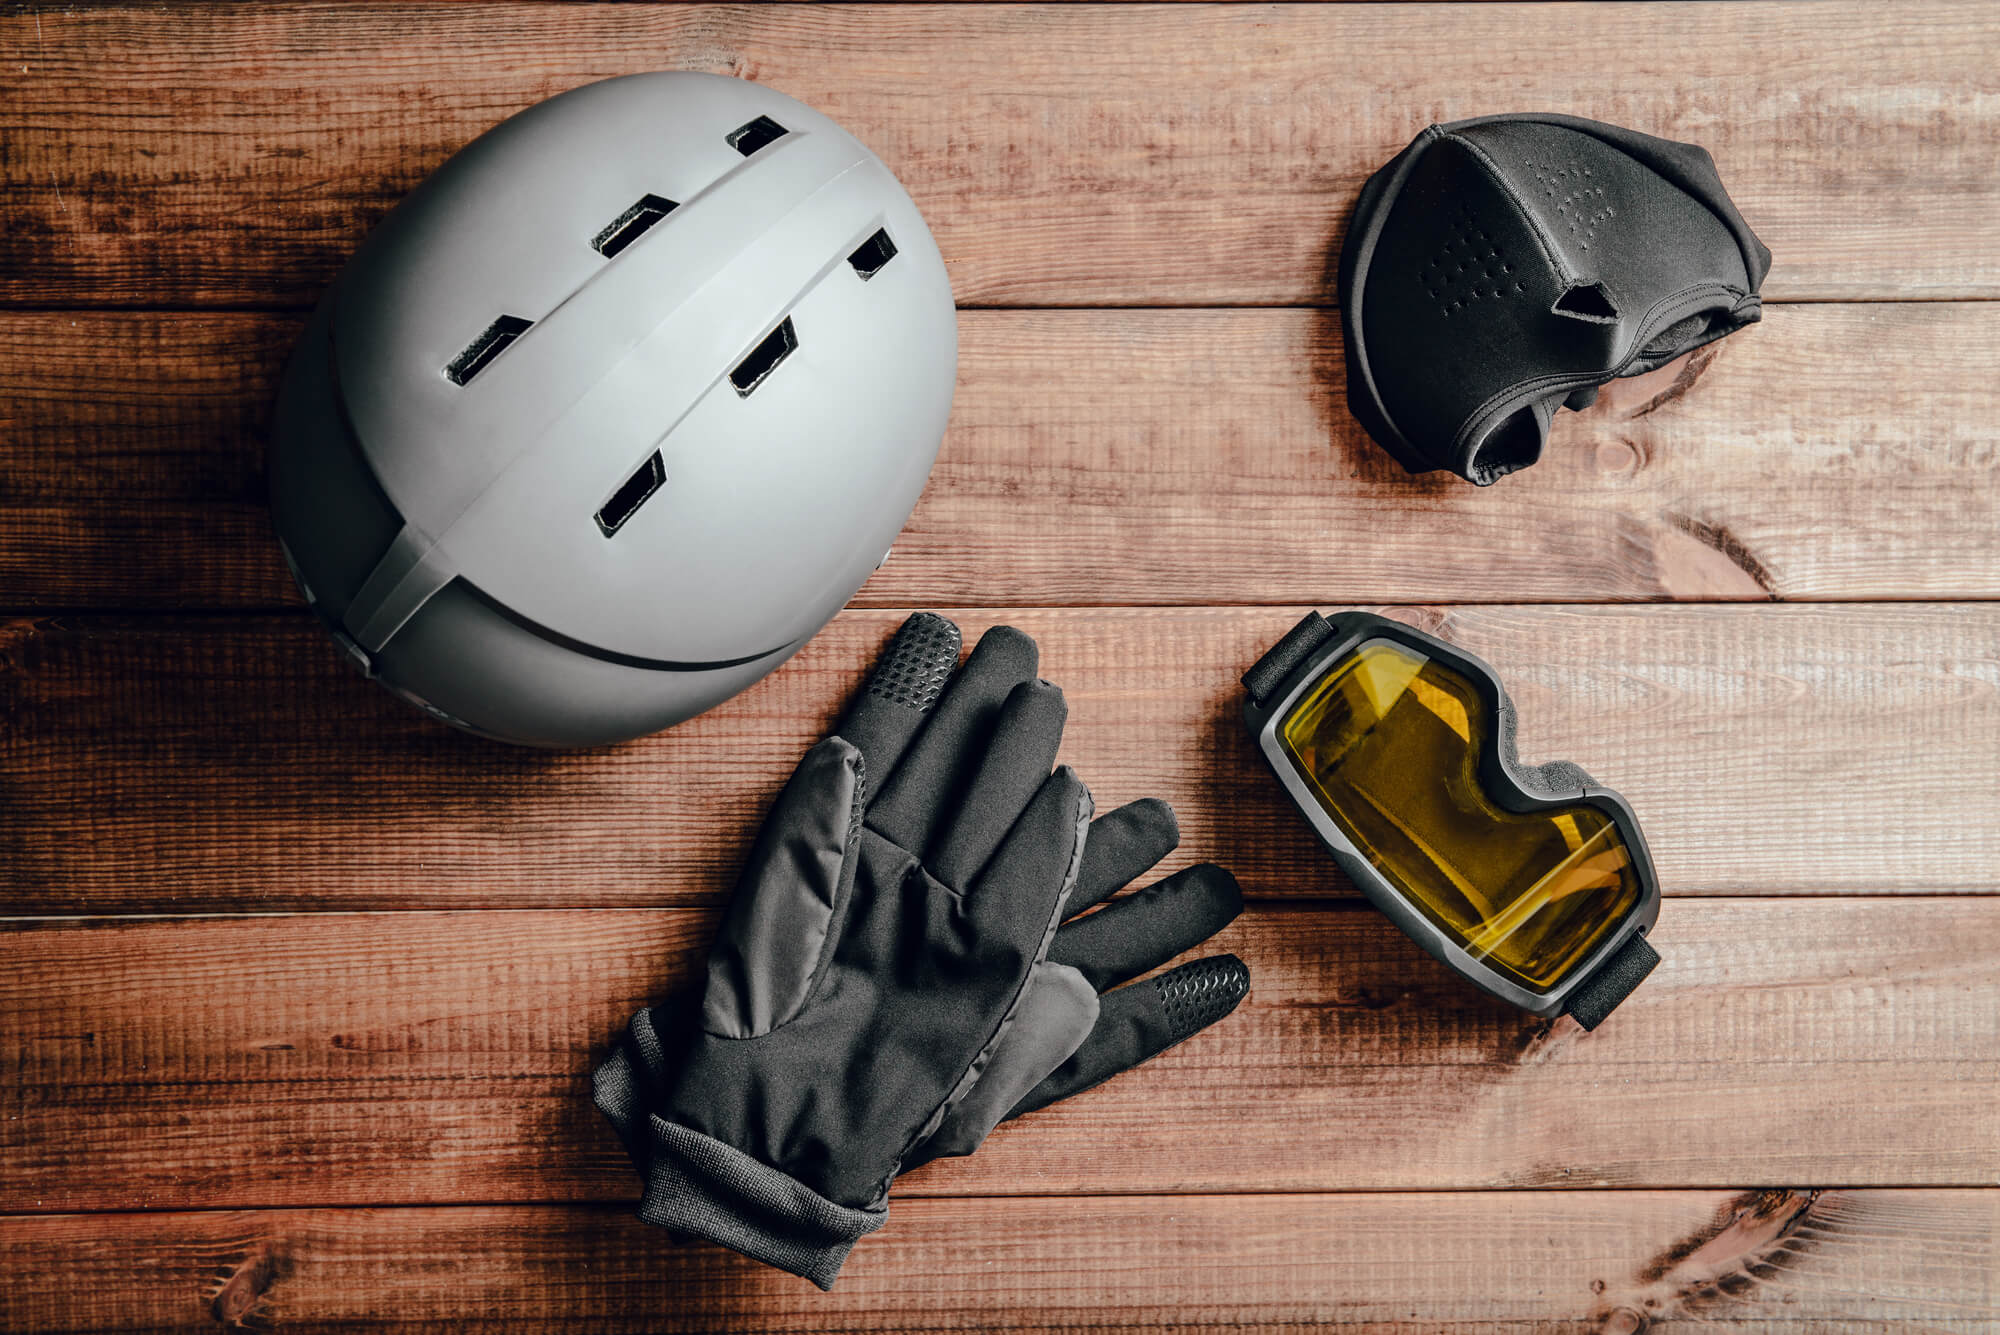 The ultimate ski packing list includes these types of ski equipment including gloves, goggles and helmet